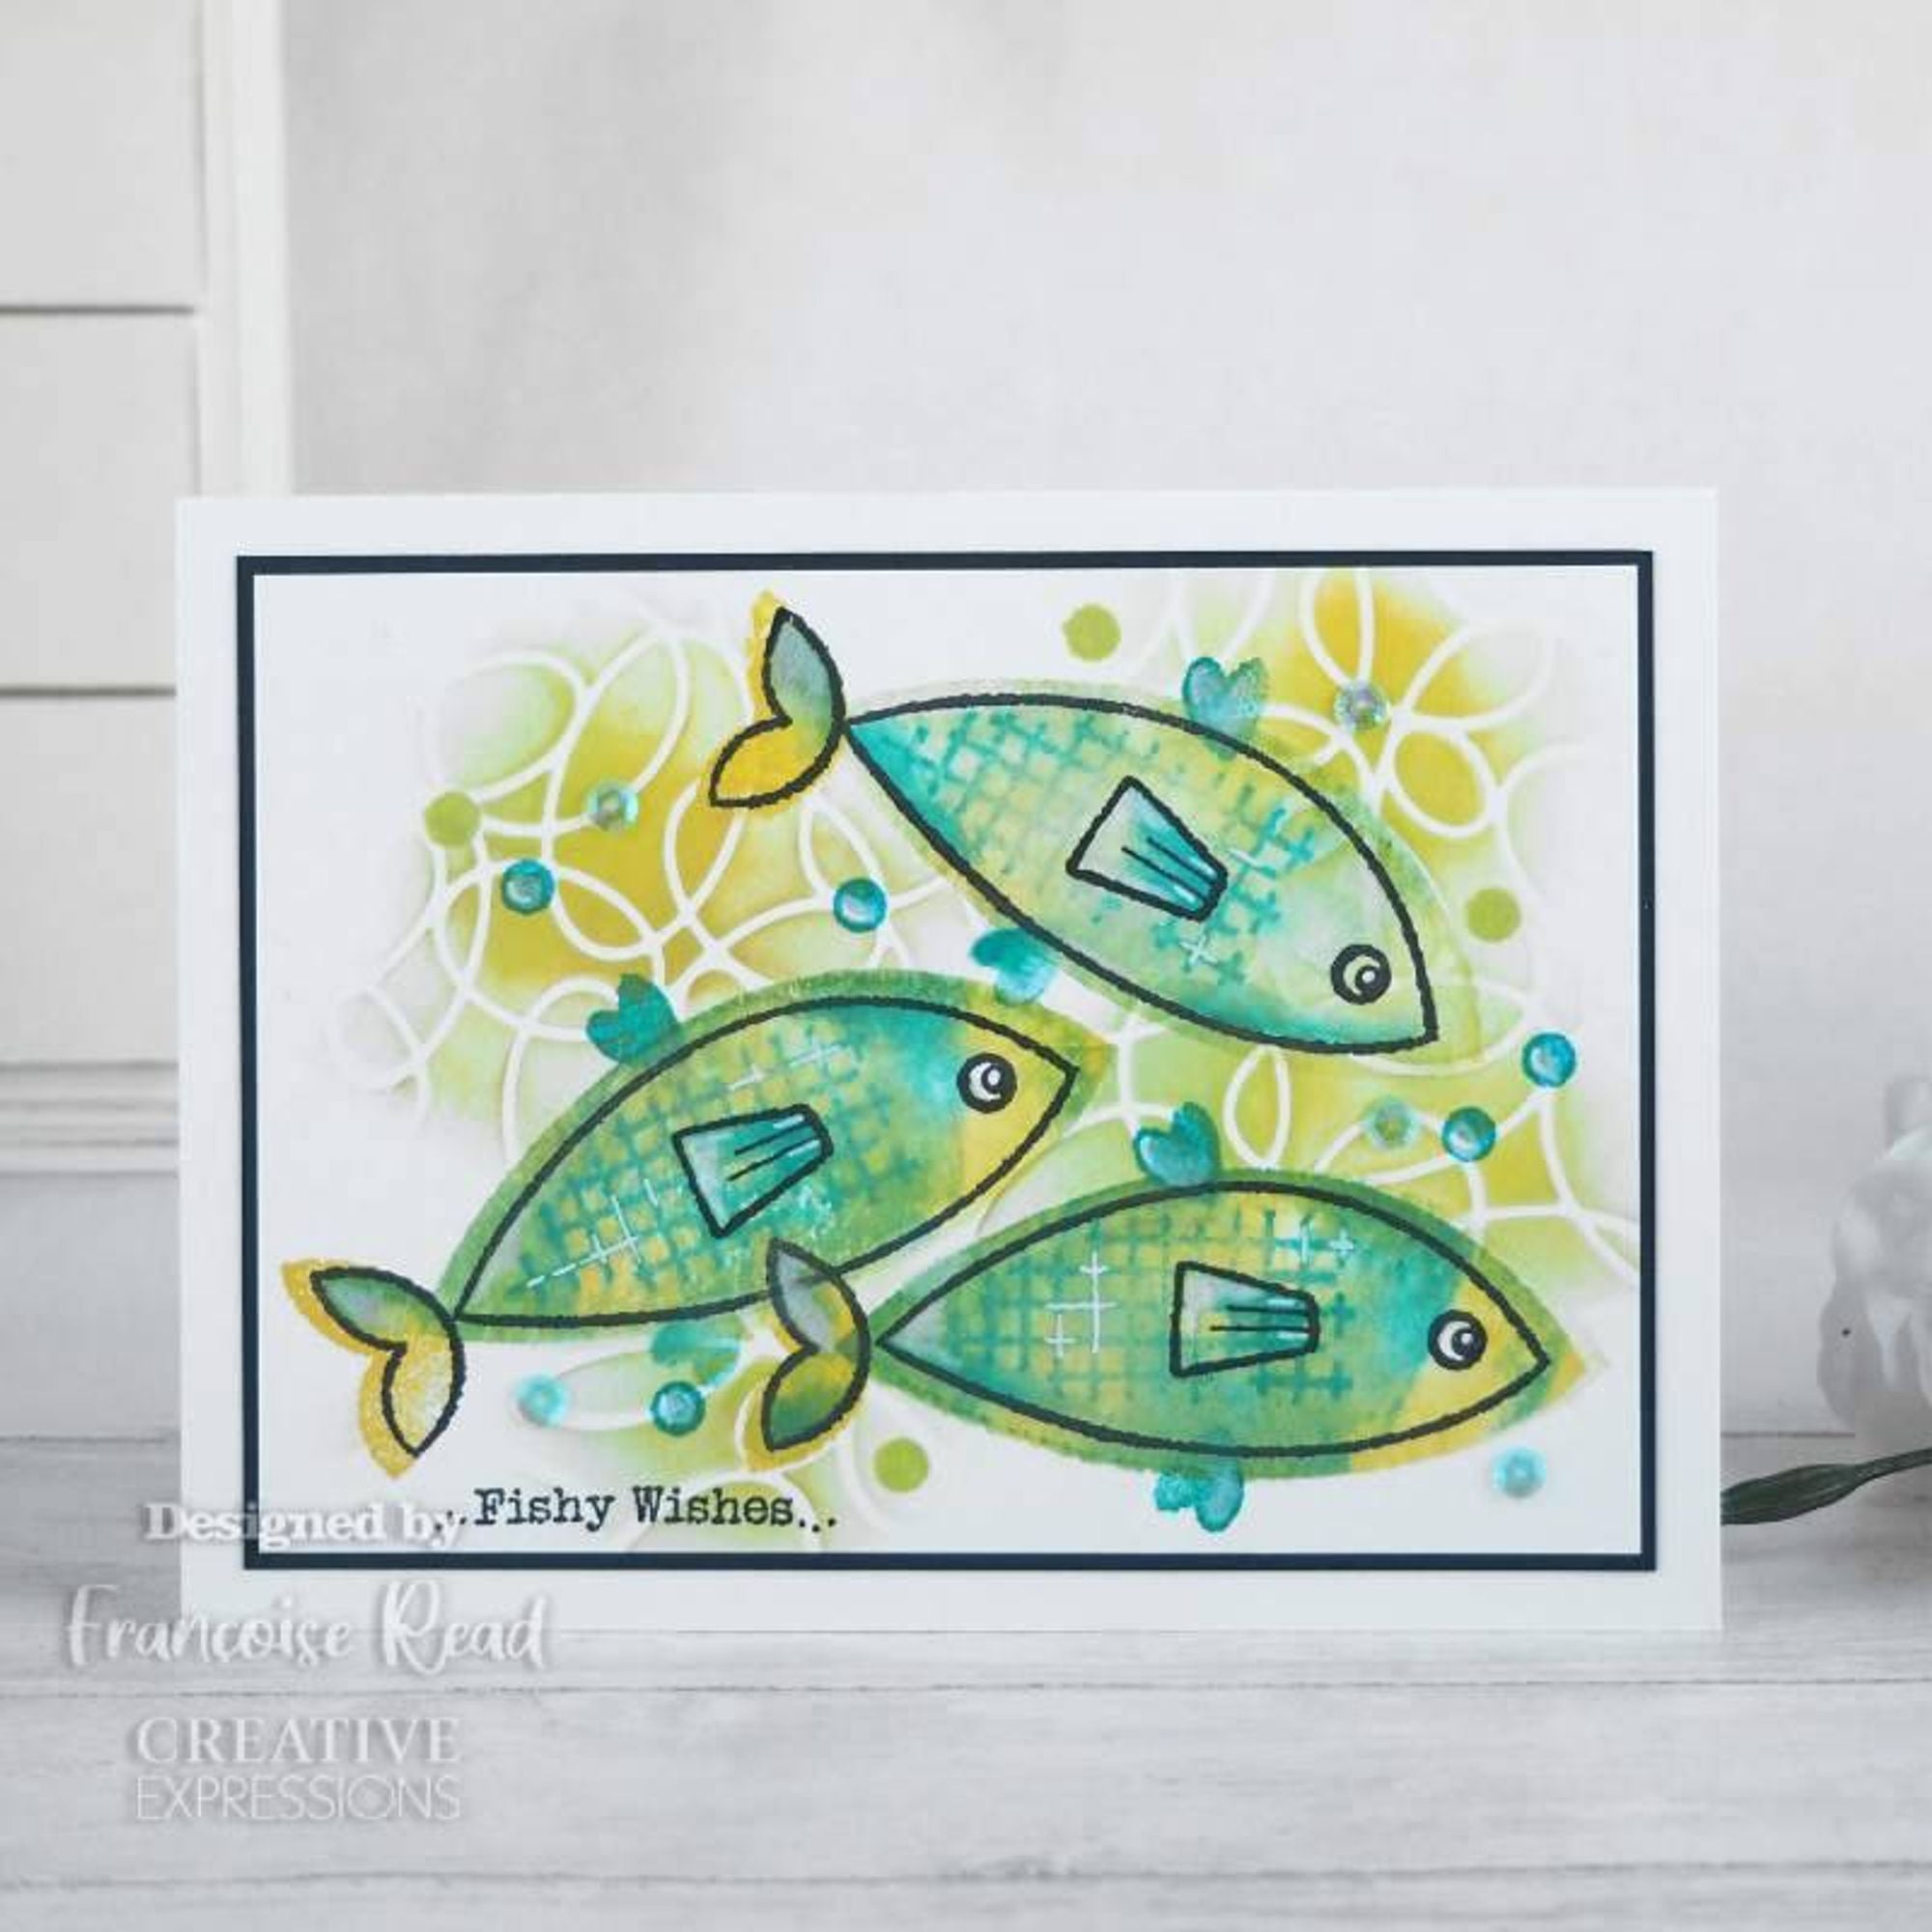 Woodware Clear Singles Build A Fish 6 in x 8 in Stamp